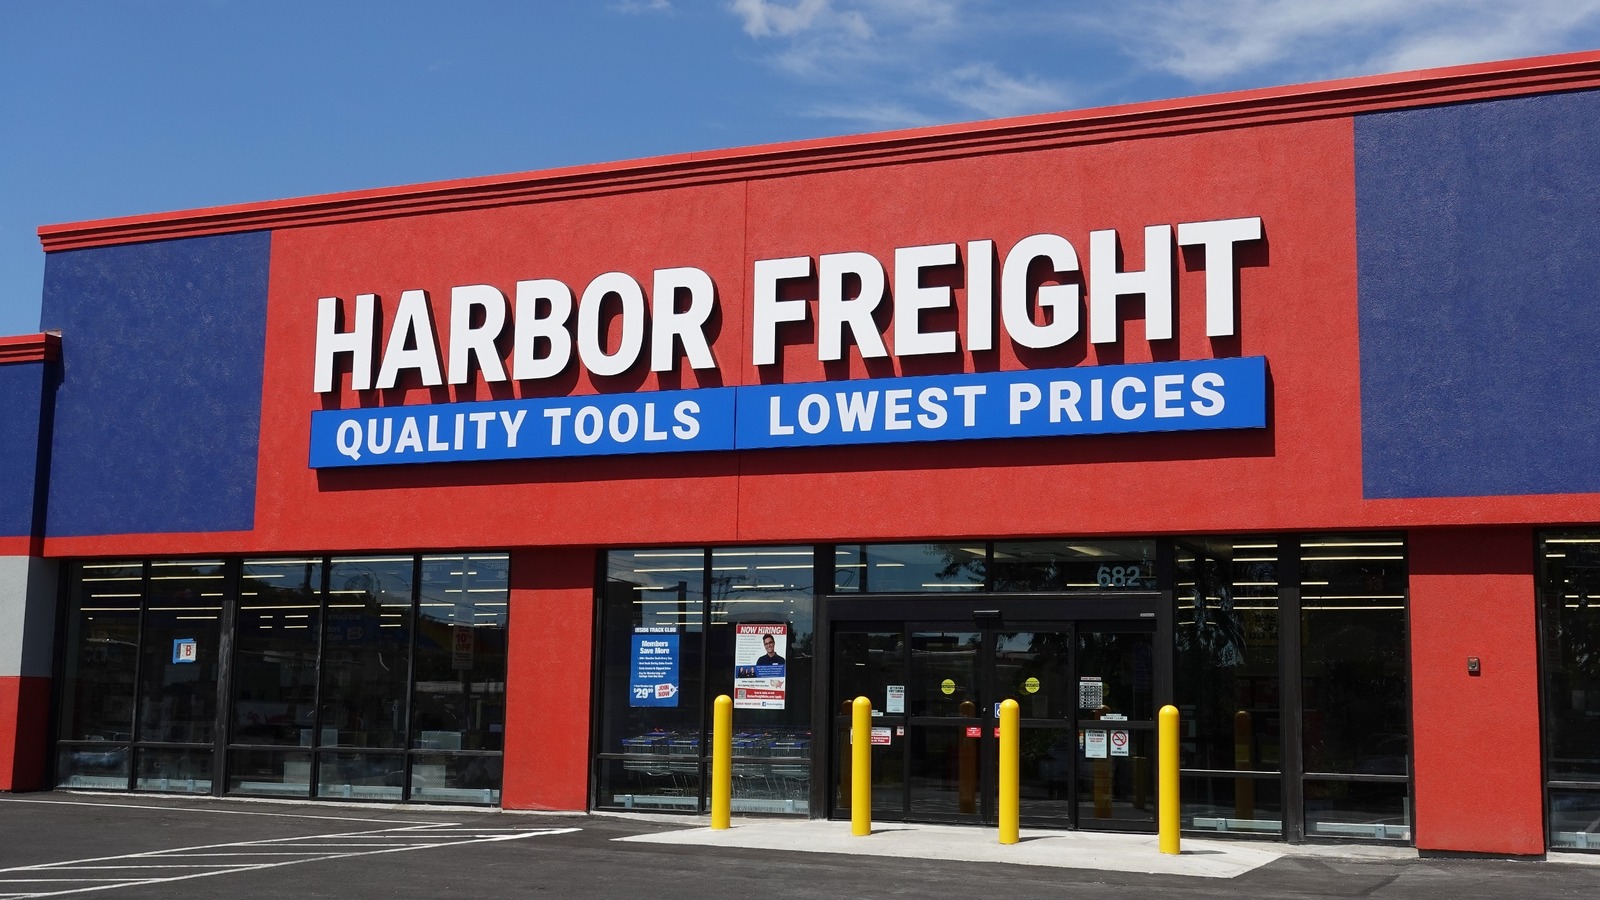 5 Must-Have Harbor Freight Tools For Every Home Garage